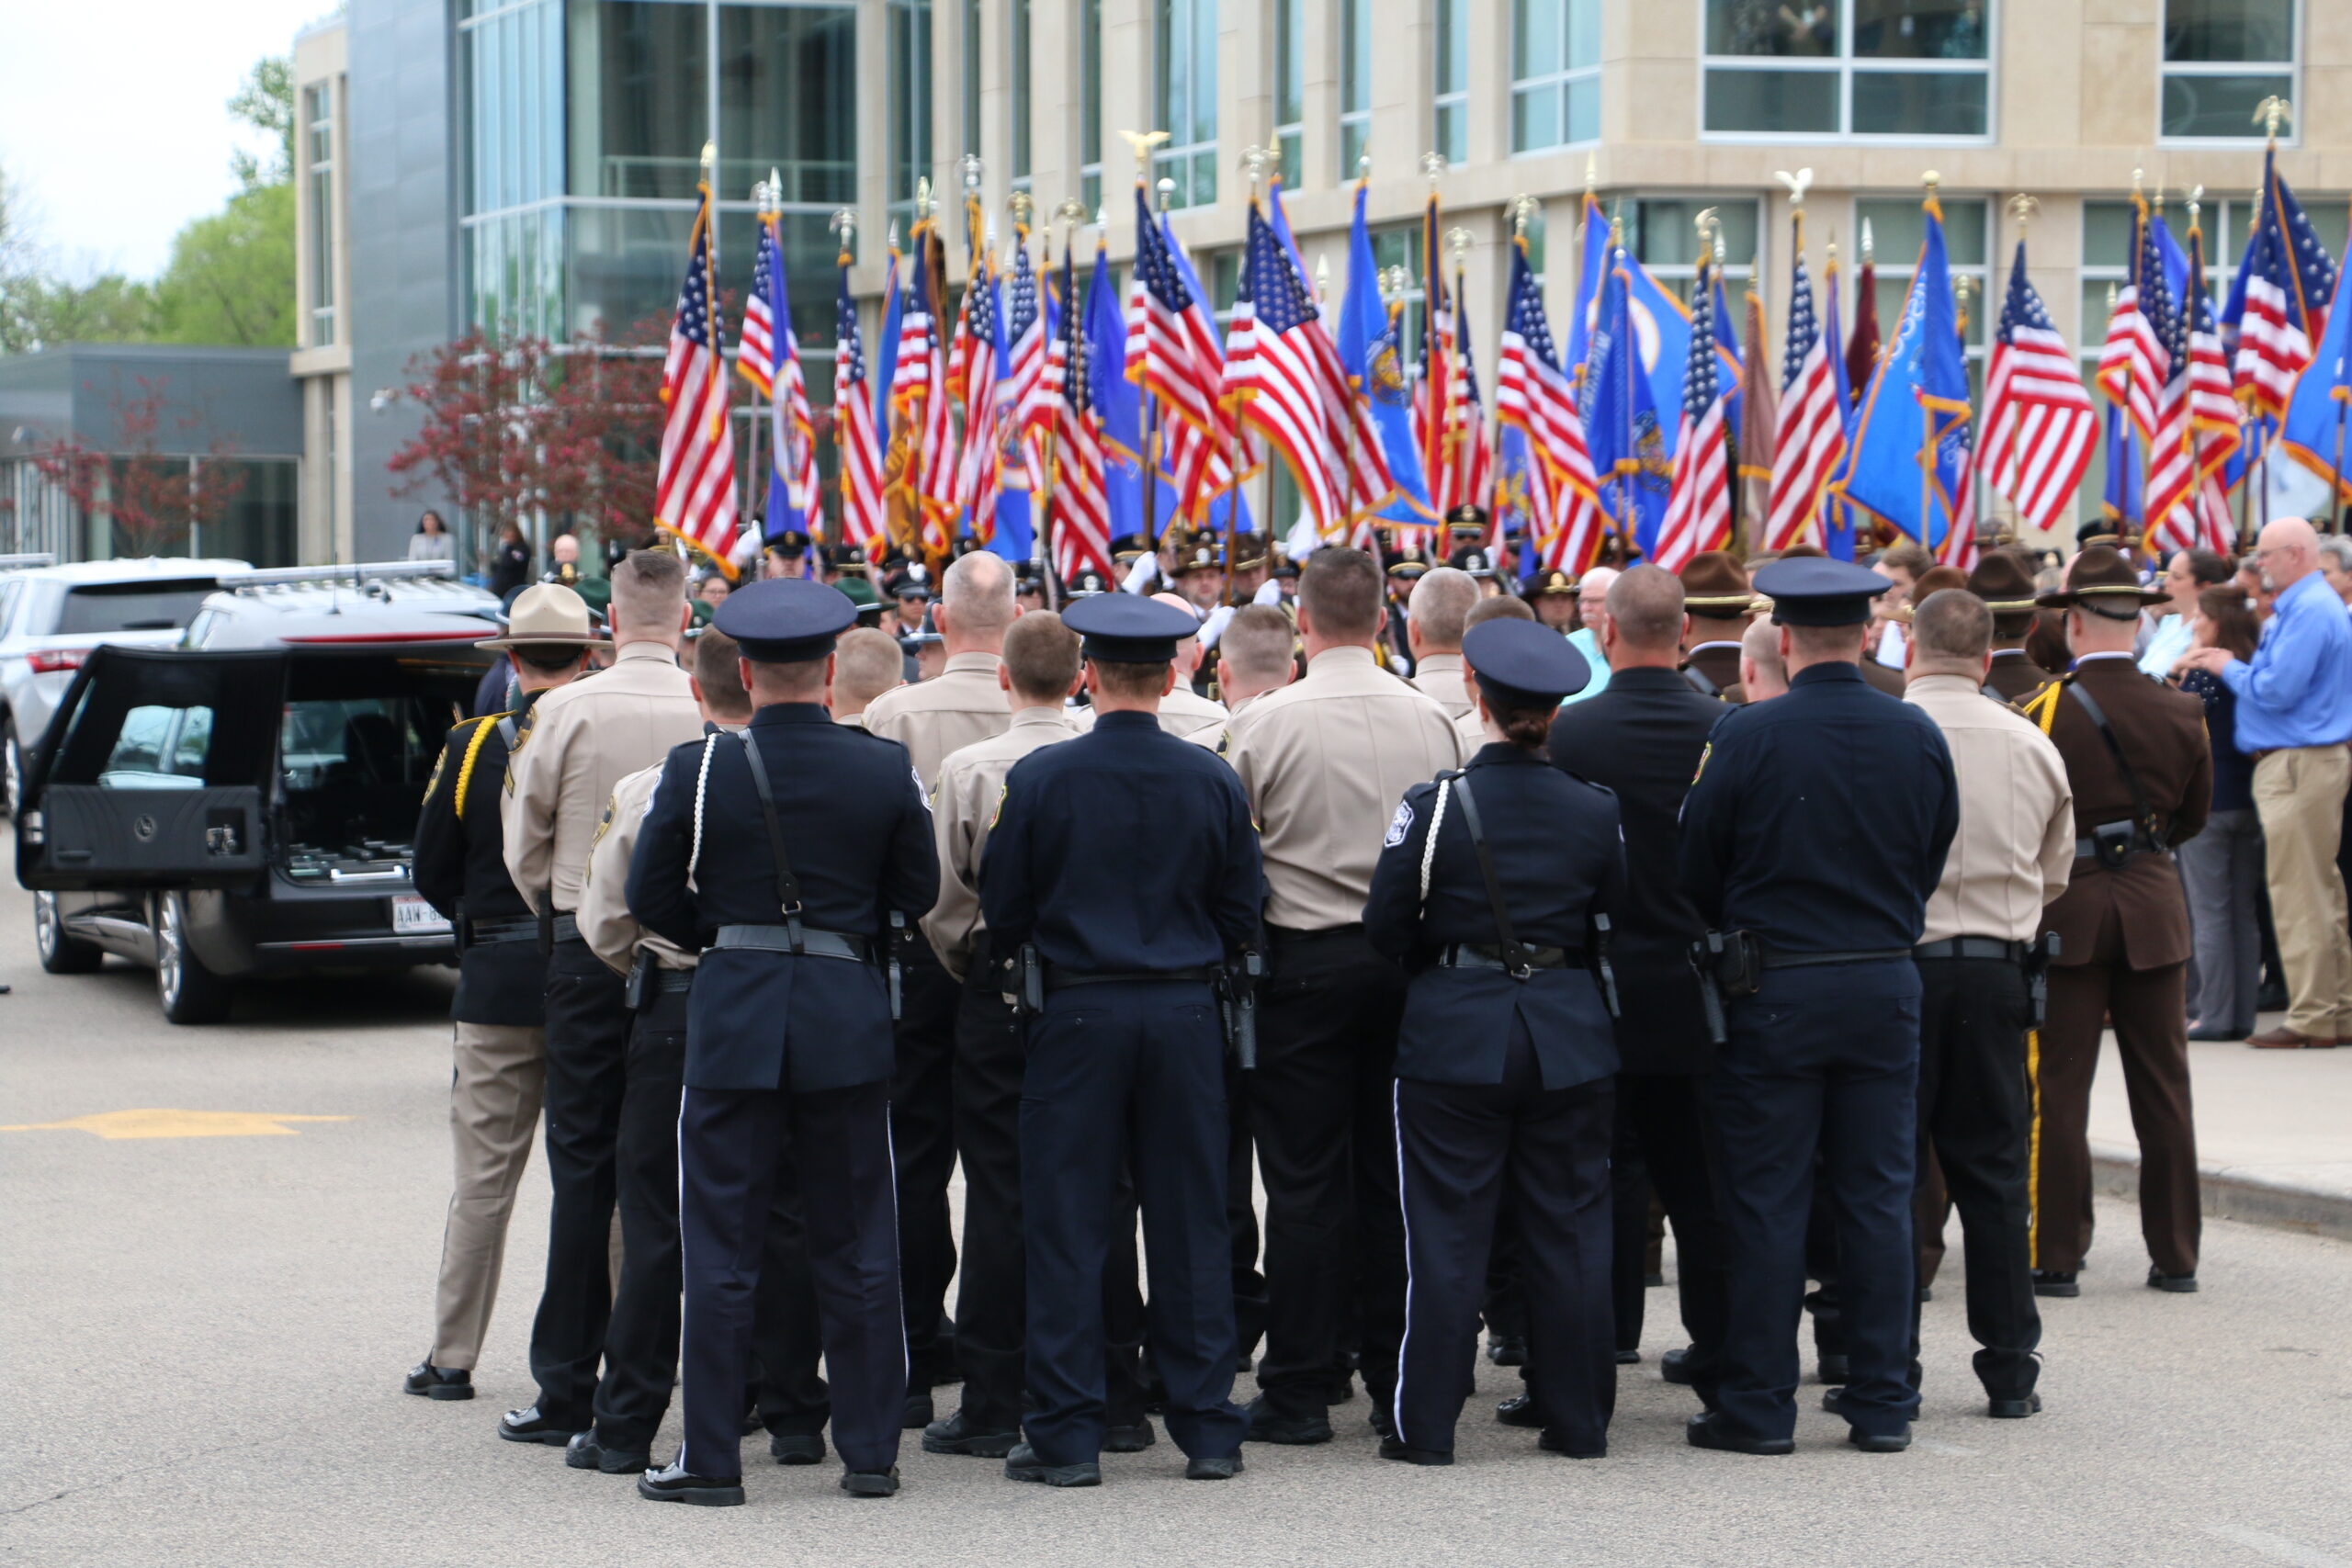 Law enforcement officers pay their respects at the funeral of St. Croix County Sheriff's Deputy Kaitie Leising